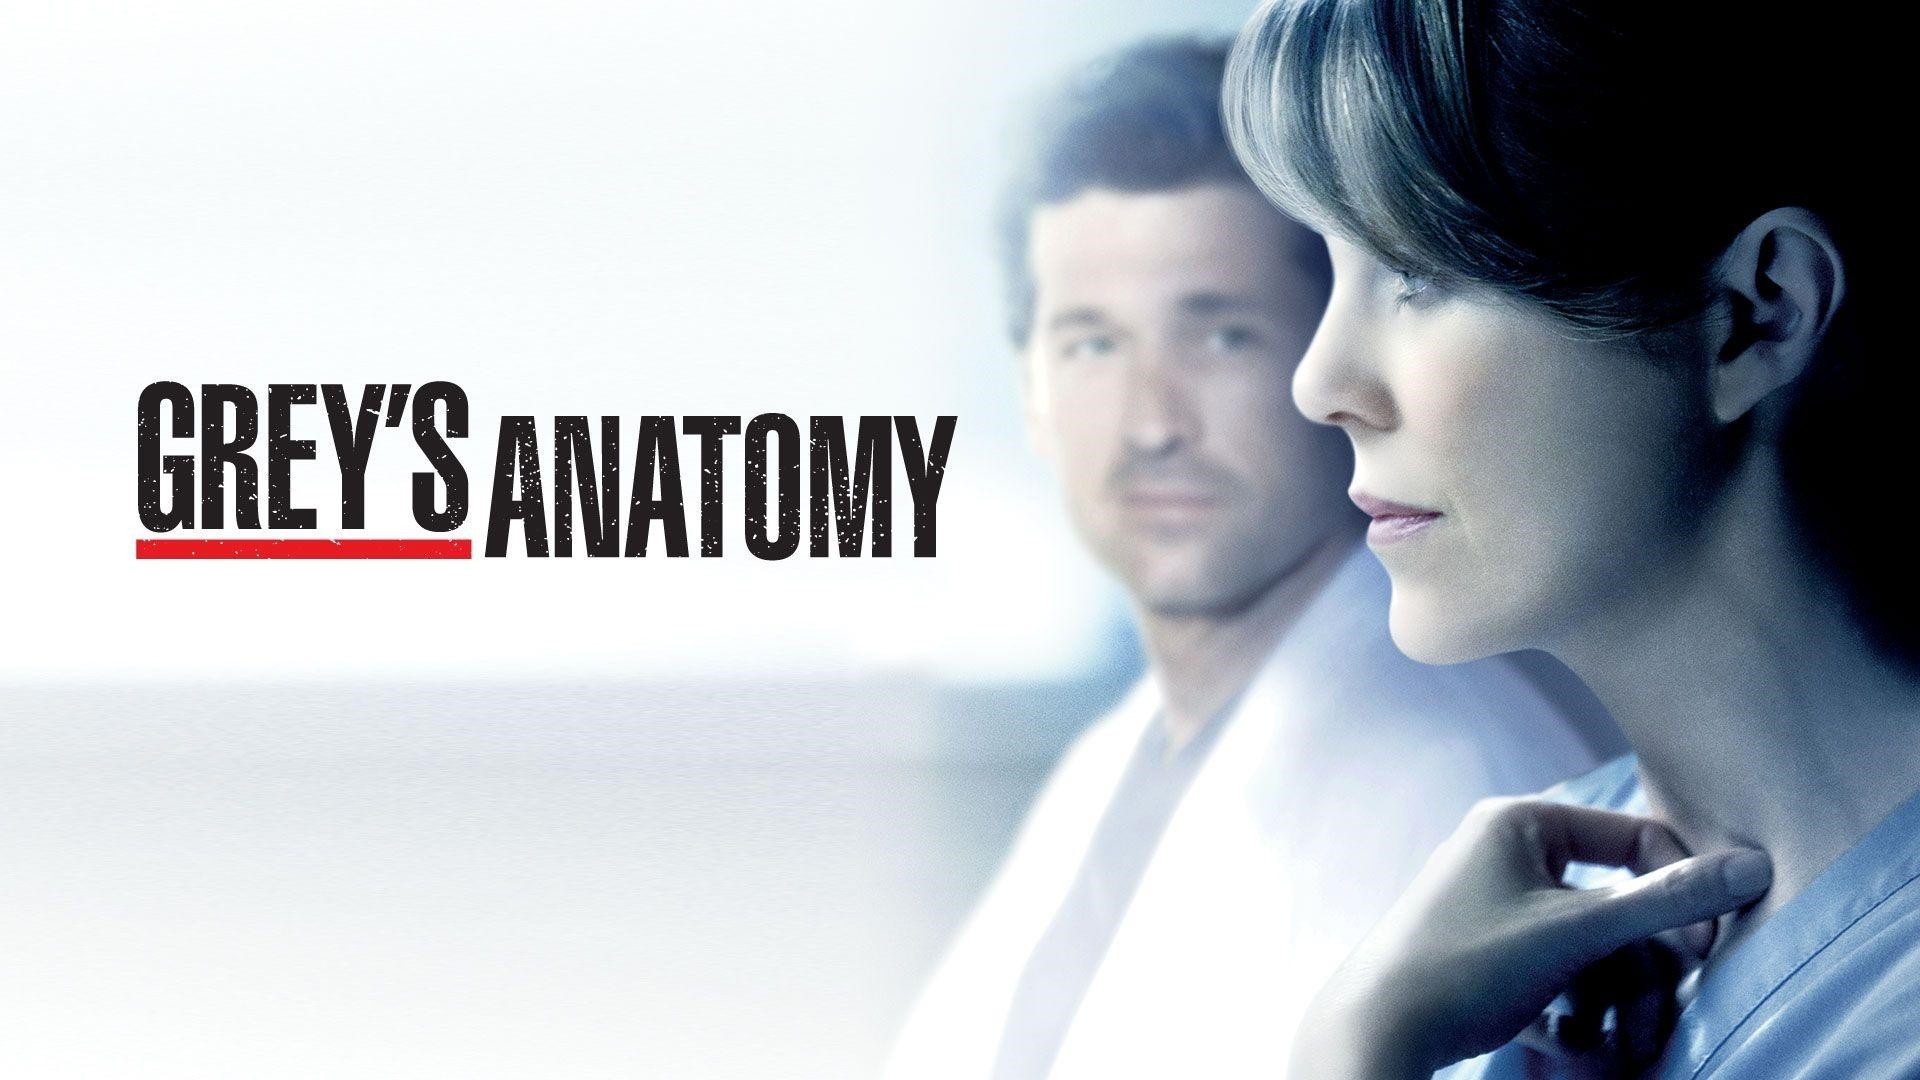 Greys Anatomy wallpapers, High-quality images, Character-driven storytelling, Gripping plotlines, 1920x1080 Full HD Desktop